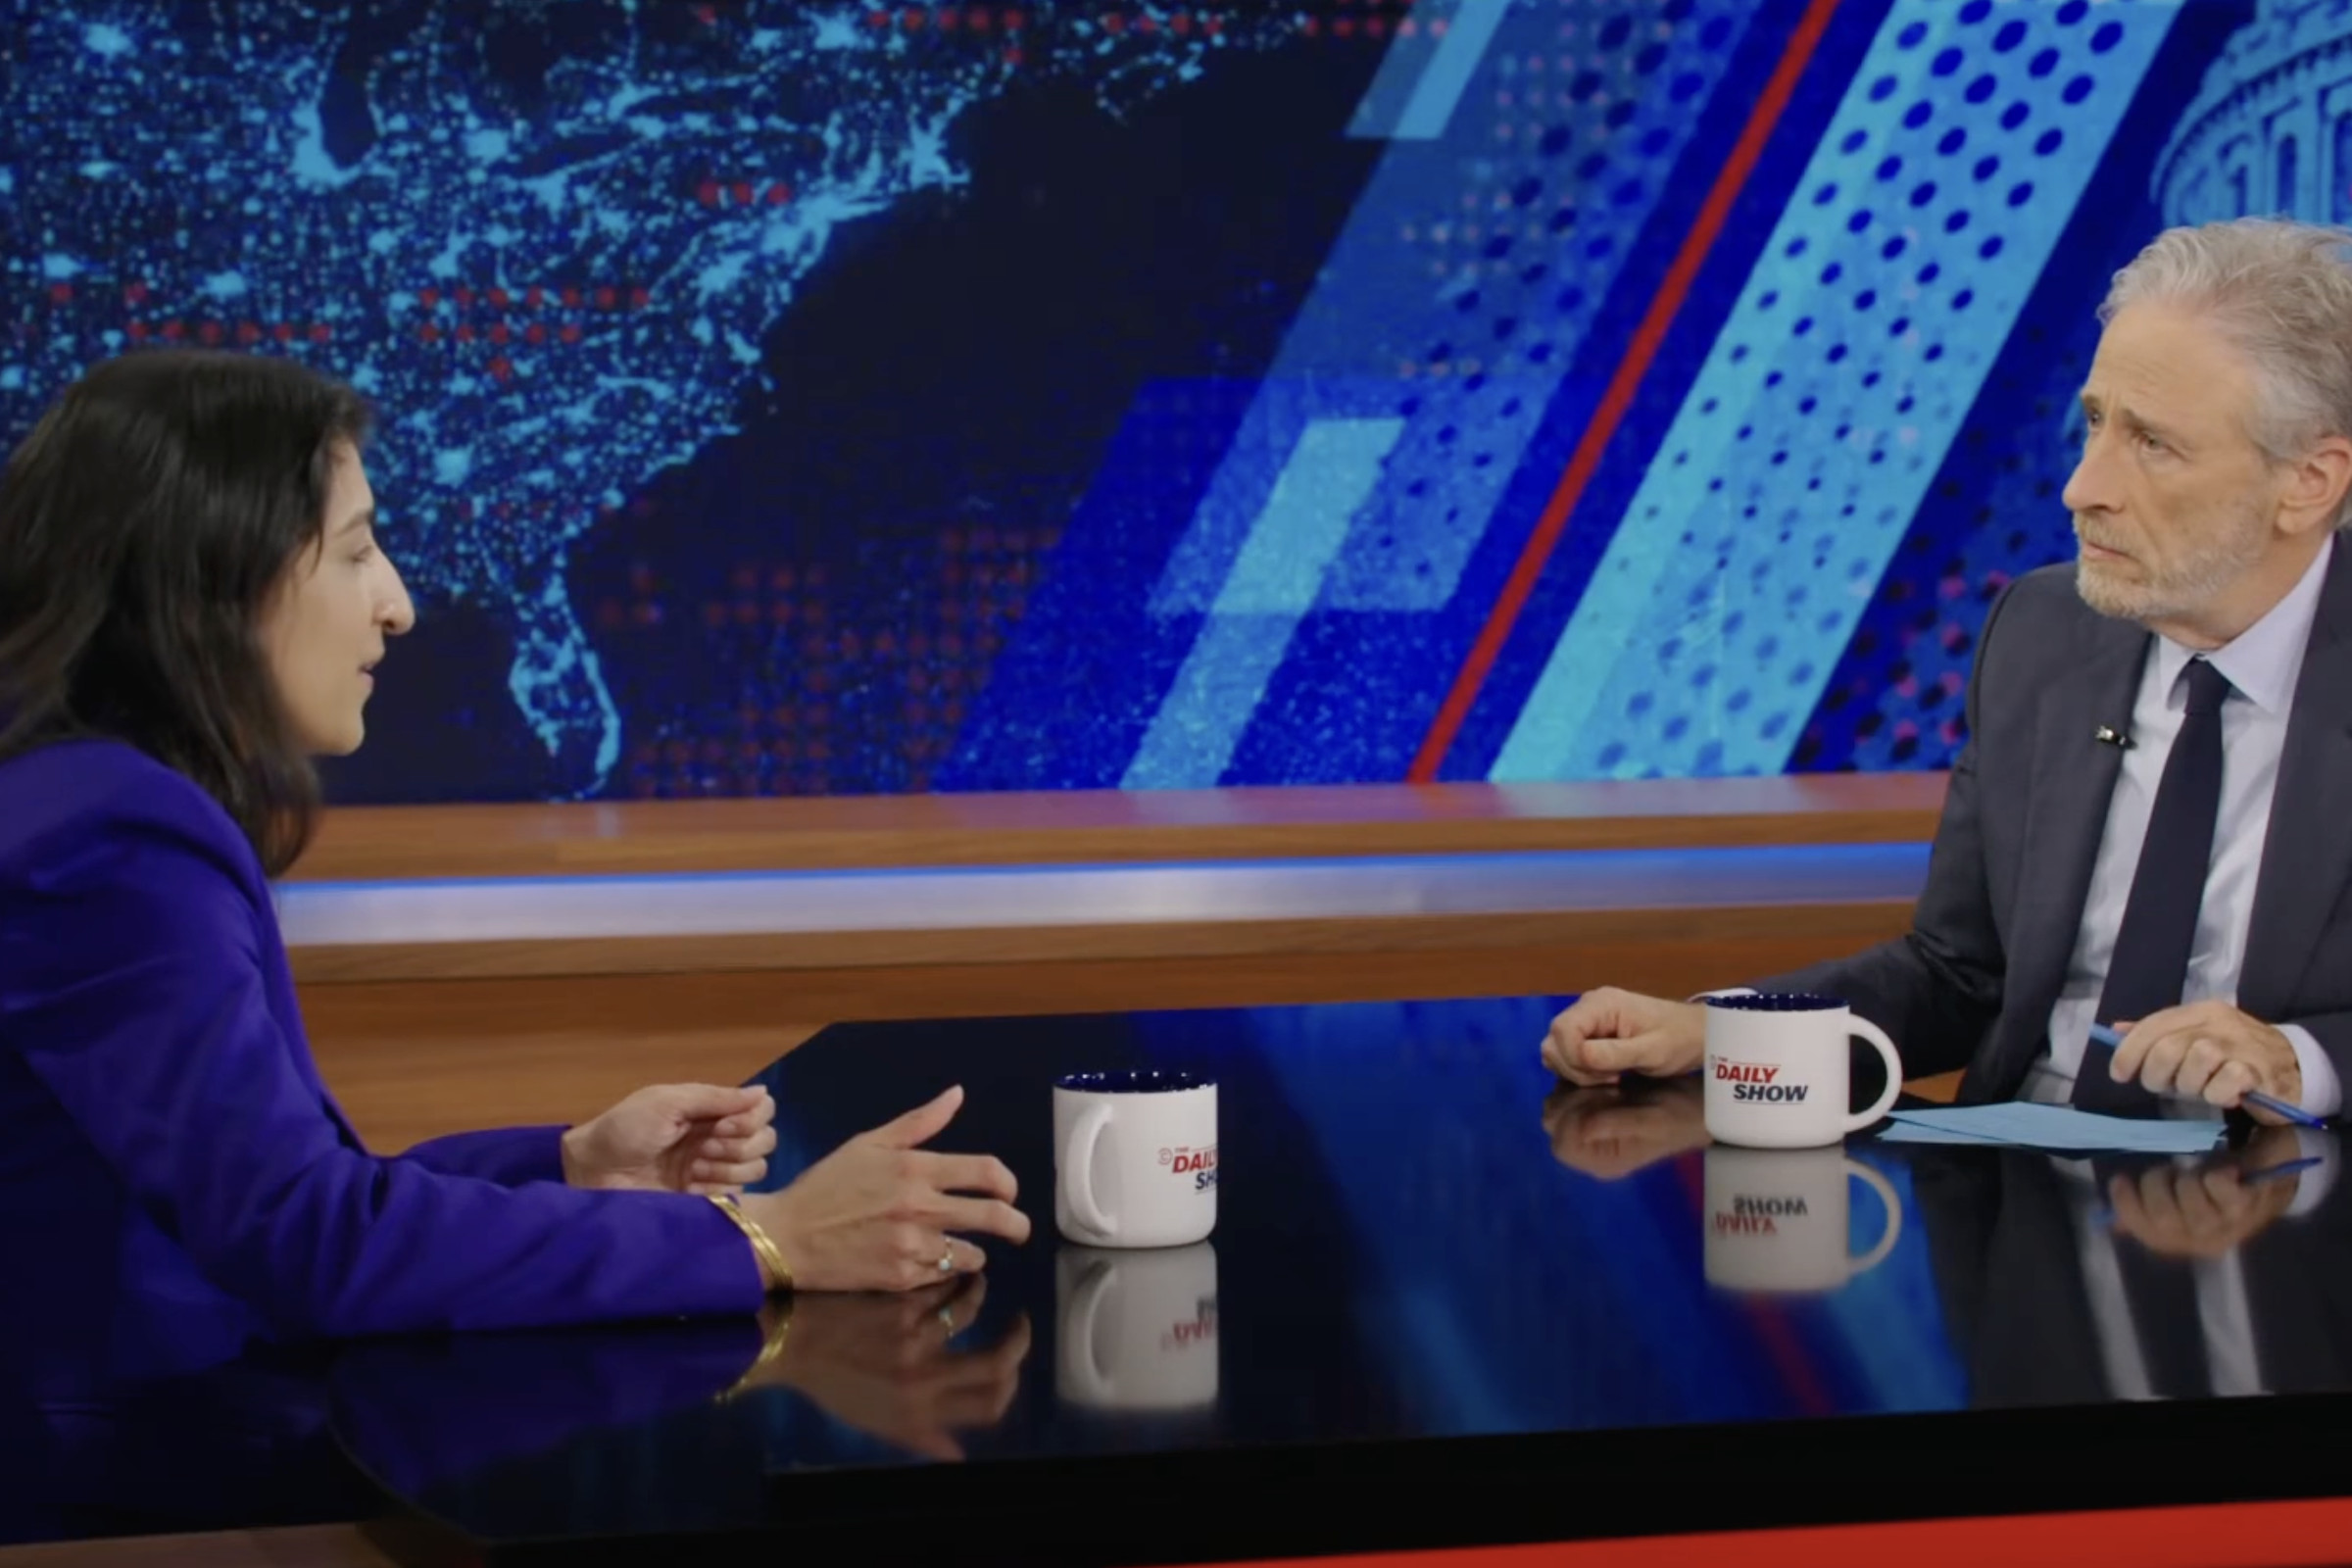 A screenshot showing Jon Stewart sitting across from Lina Khan during his Daily Show interview.